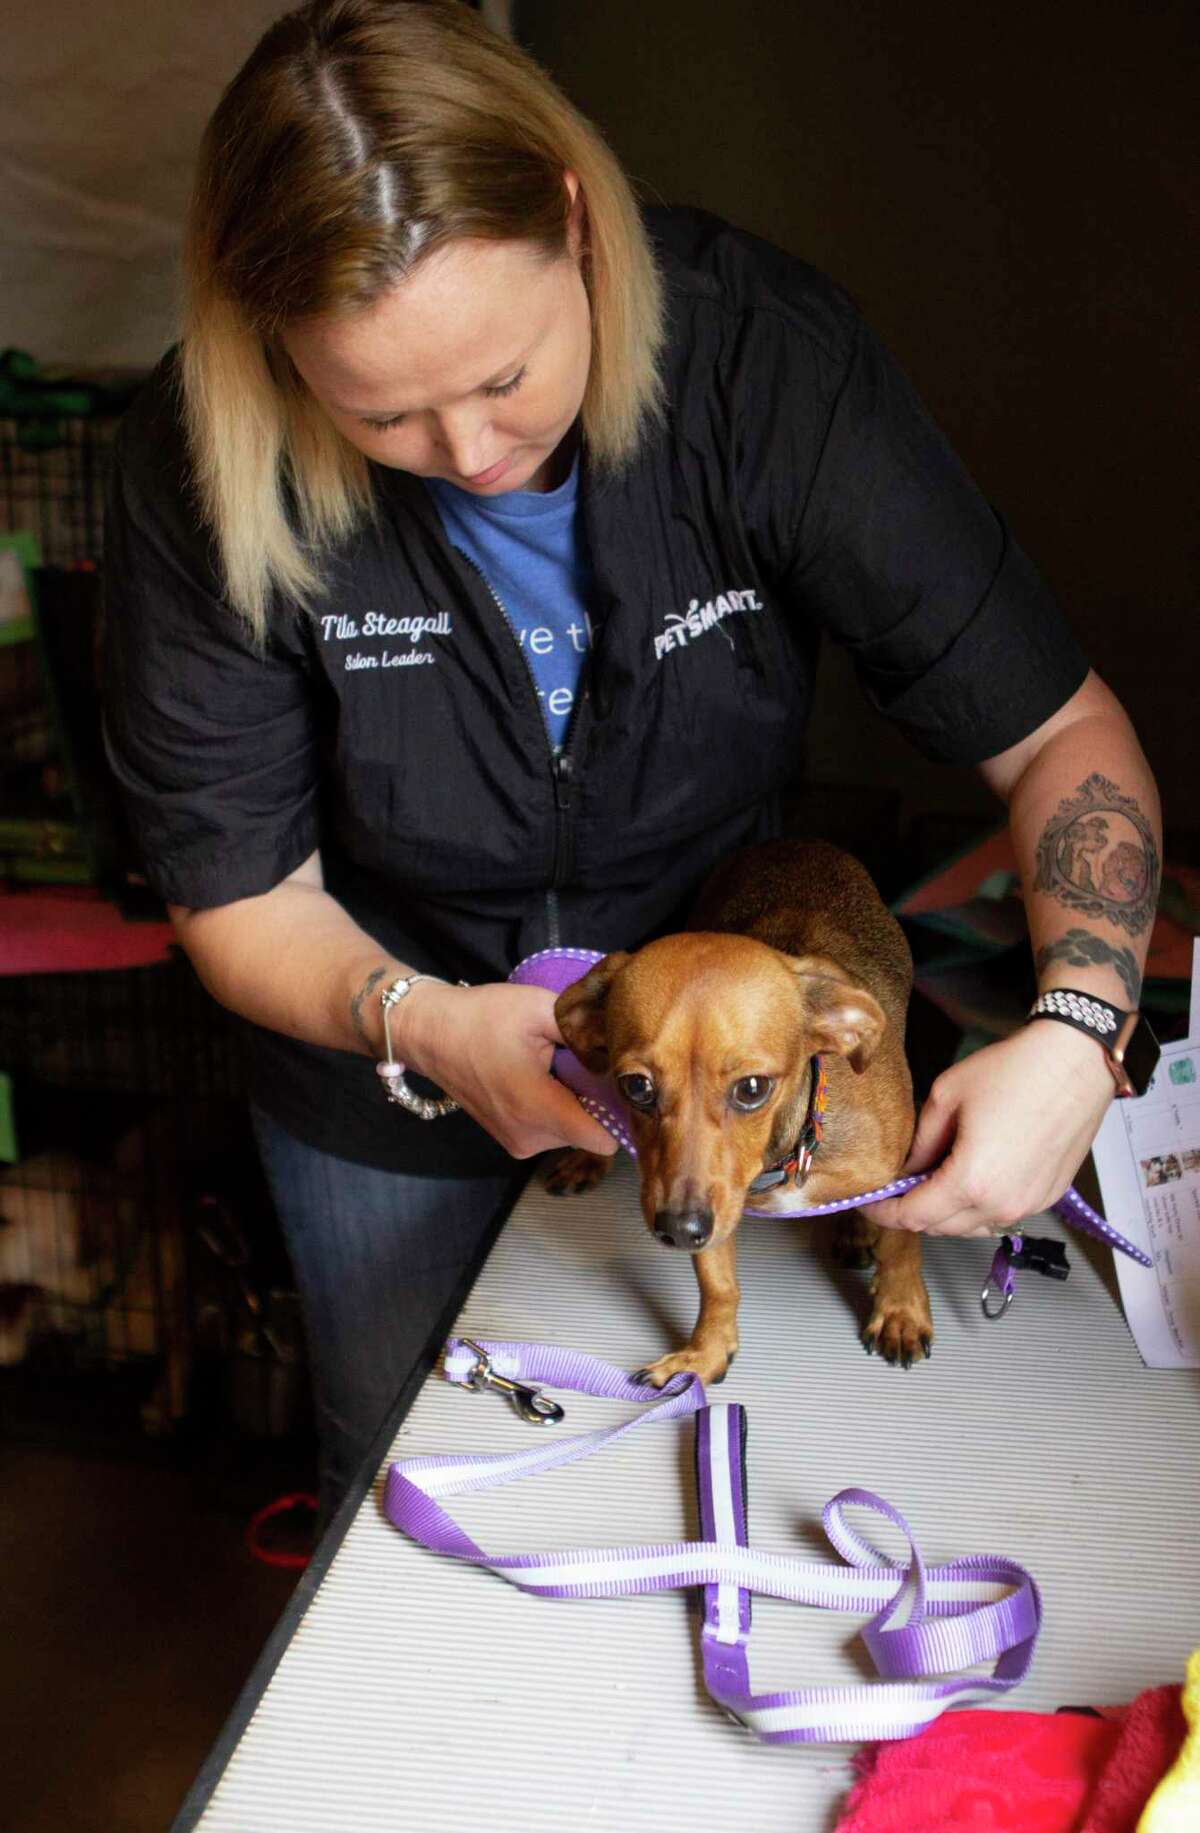 PetSmart salon leader Tina Steagall prepares daschund mix Addie for the runway before the Doggies and Divas Dinner and Fashion Show Saturday, Sept. 22, 2018 at Cedar Lodge Restaurant and Event Hall. This year’s Doggies and Divas event is set for Oct. 30 at April Sound.